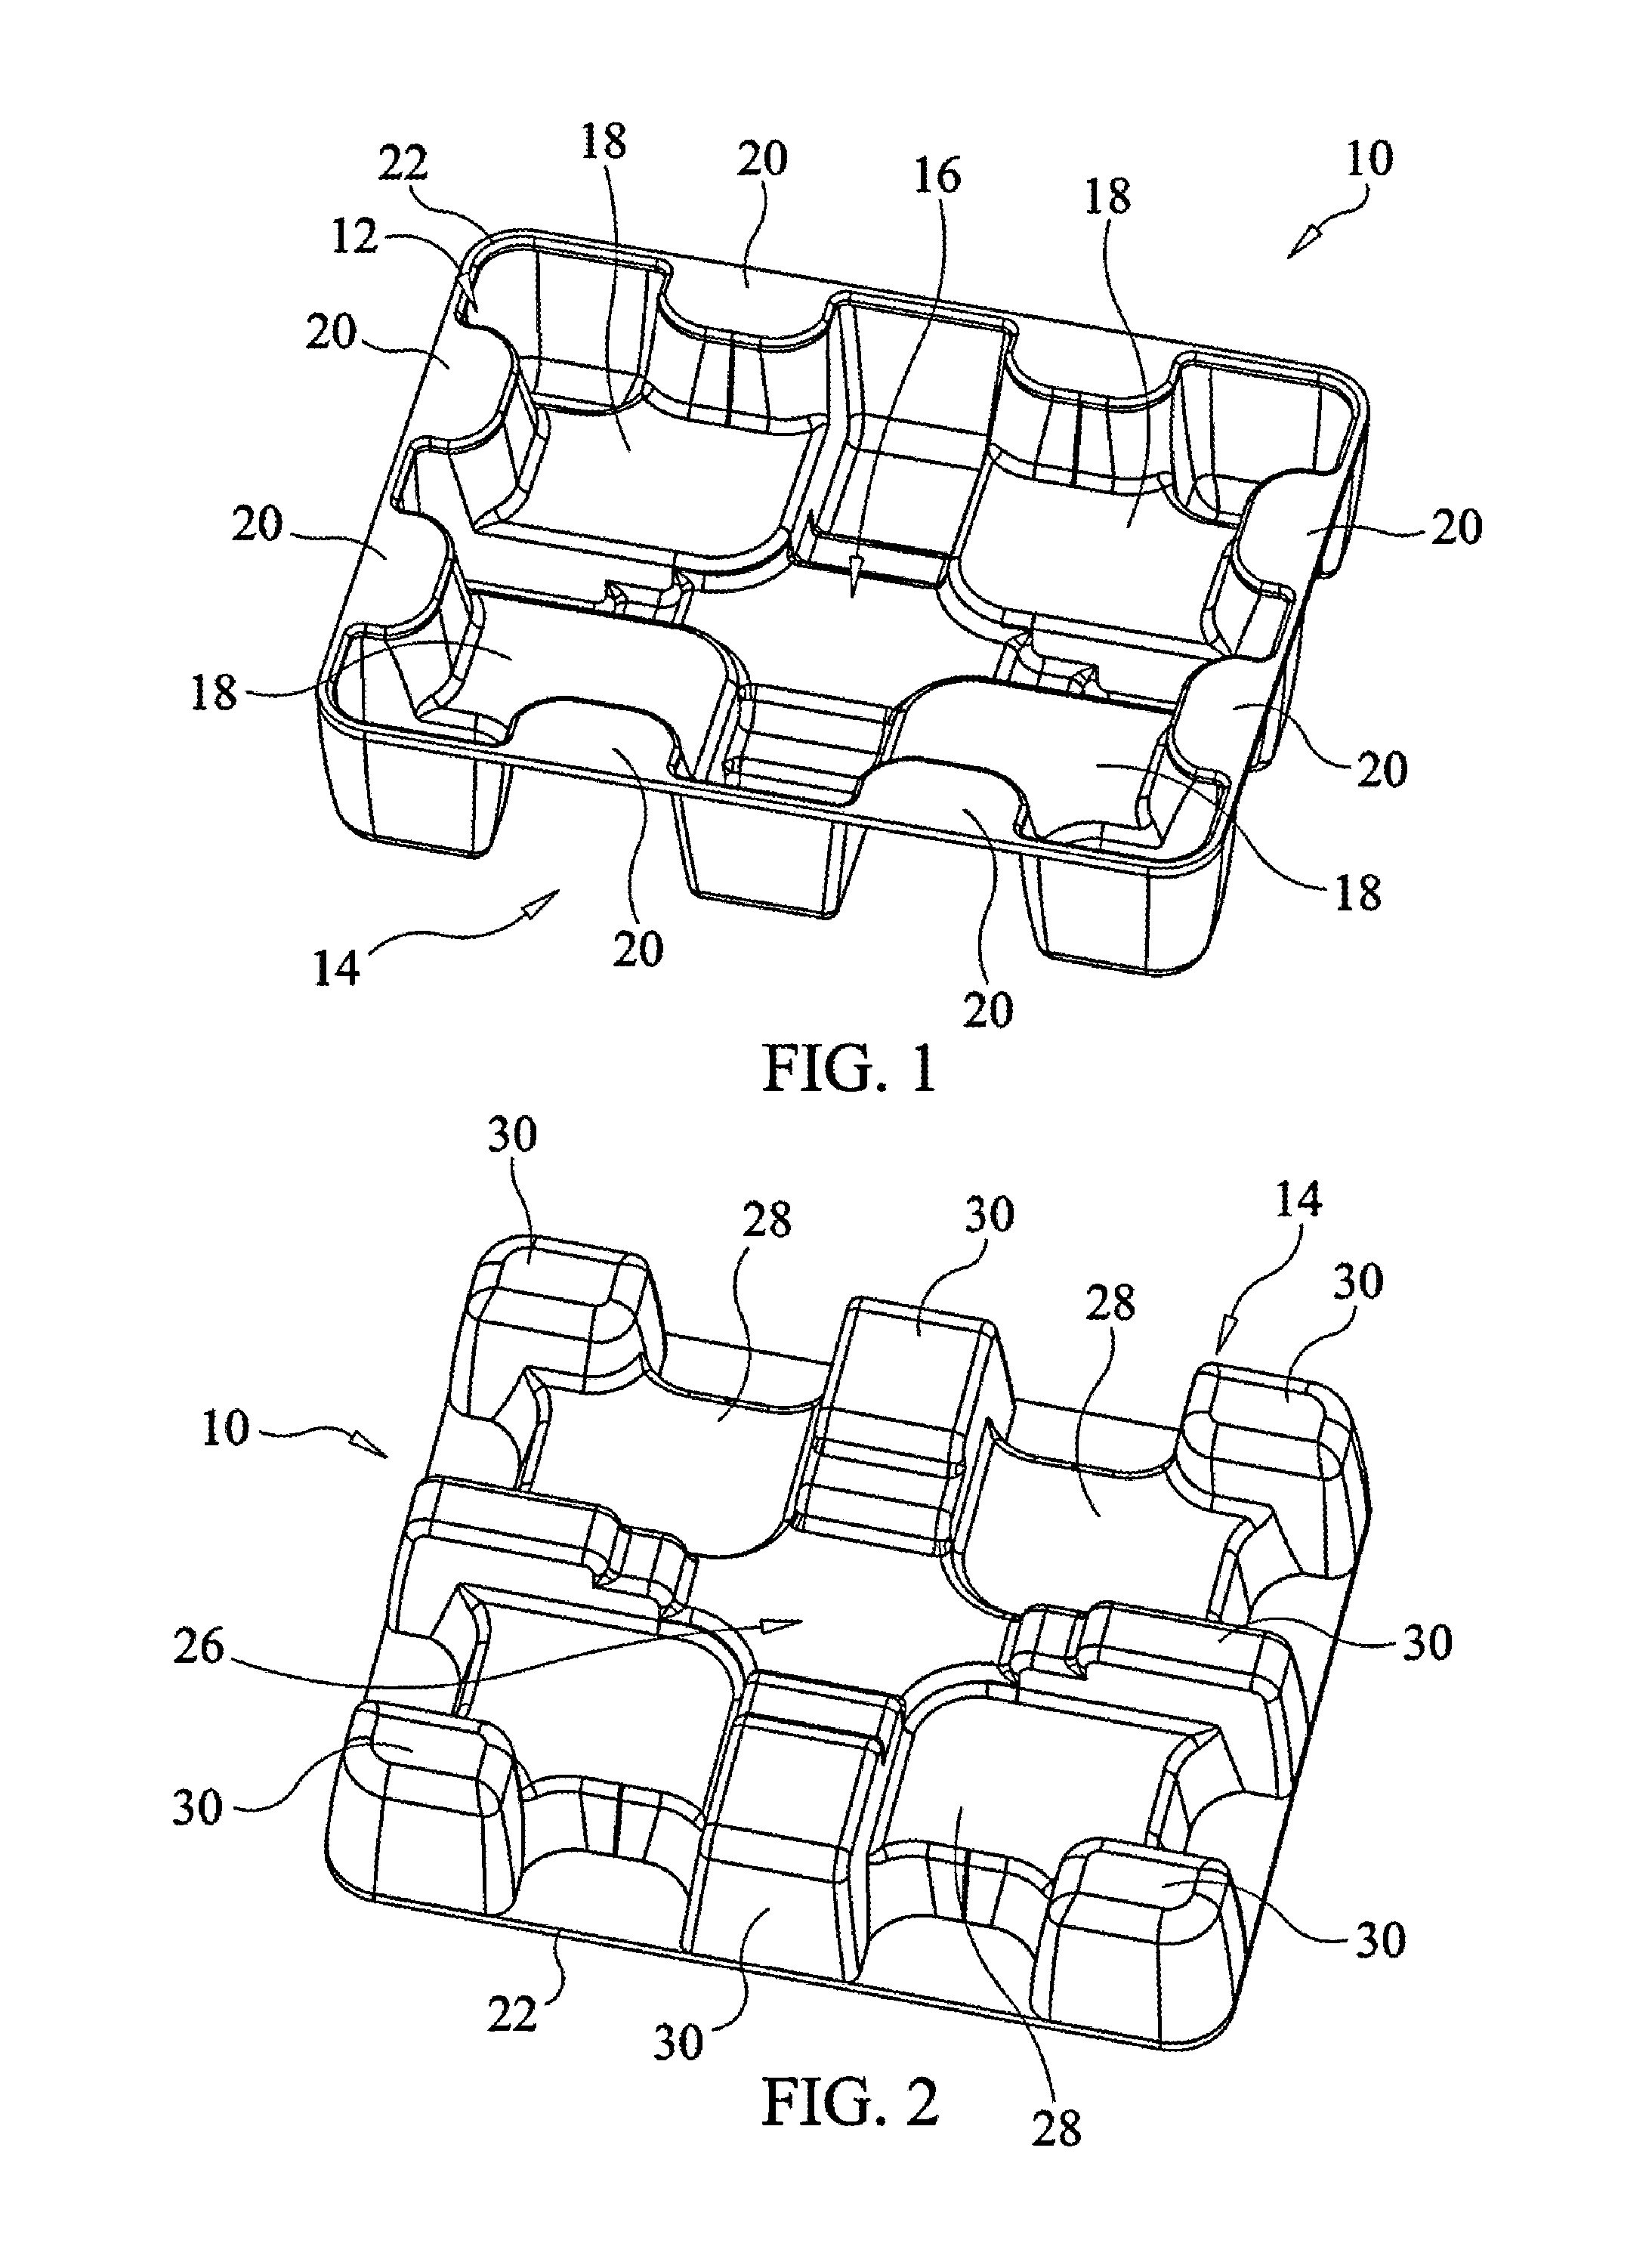 Apparatus, Systems and Methods for Packaging Electronic Products